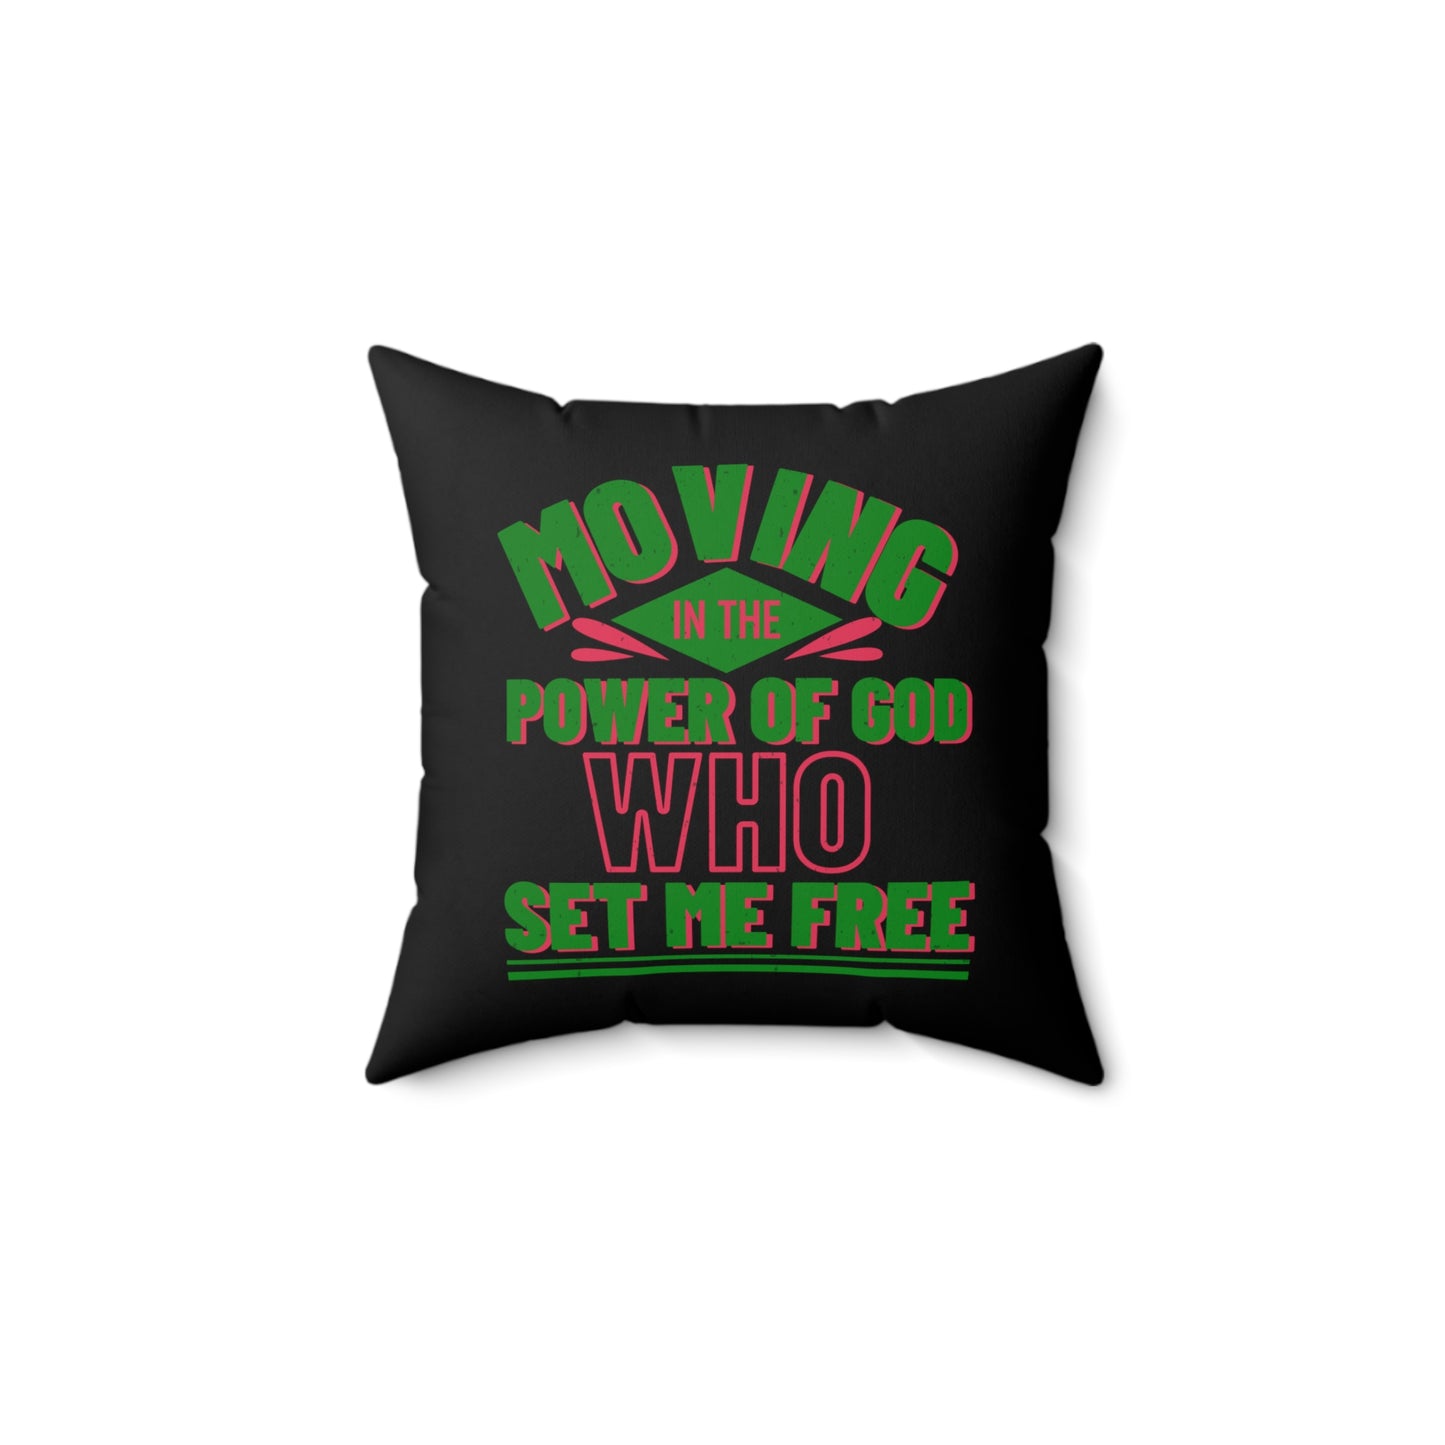 Moving In The Power Of God Who Set Me Free Pillow